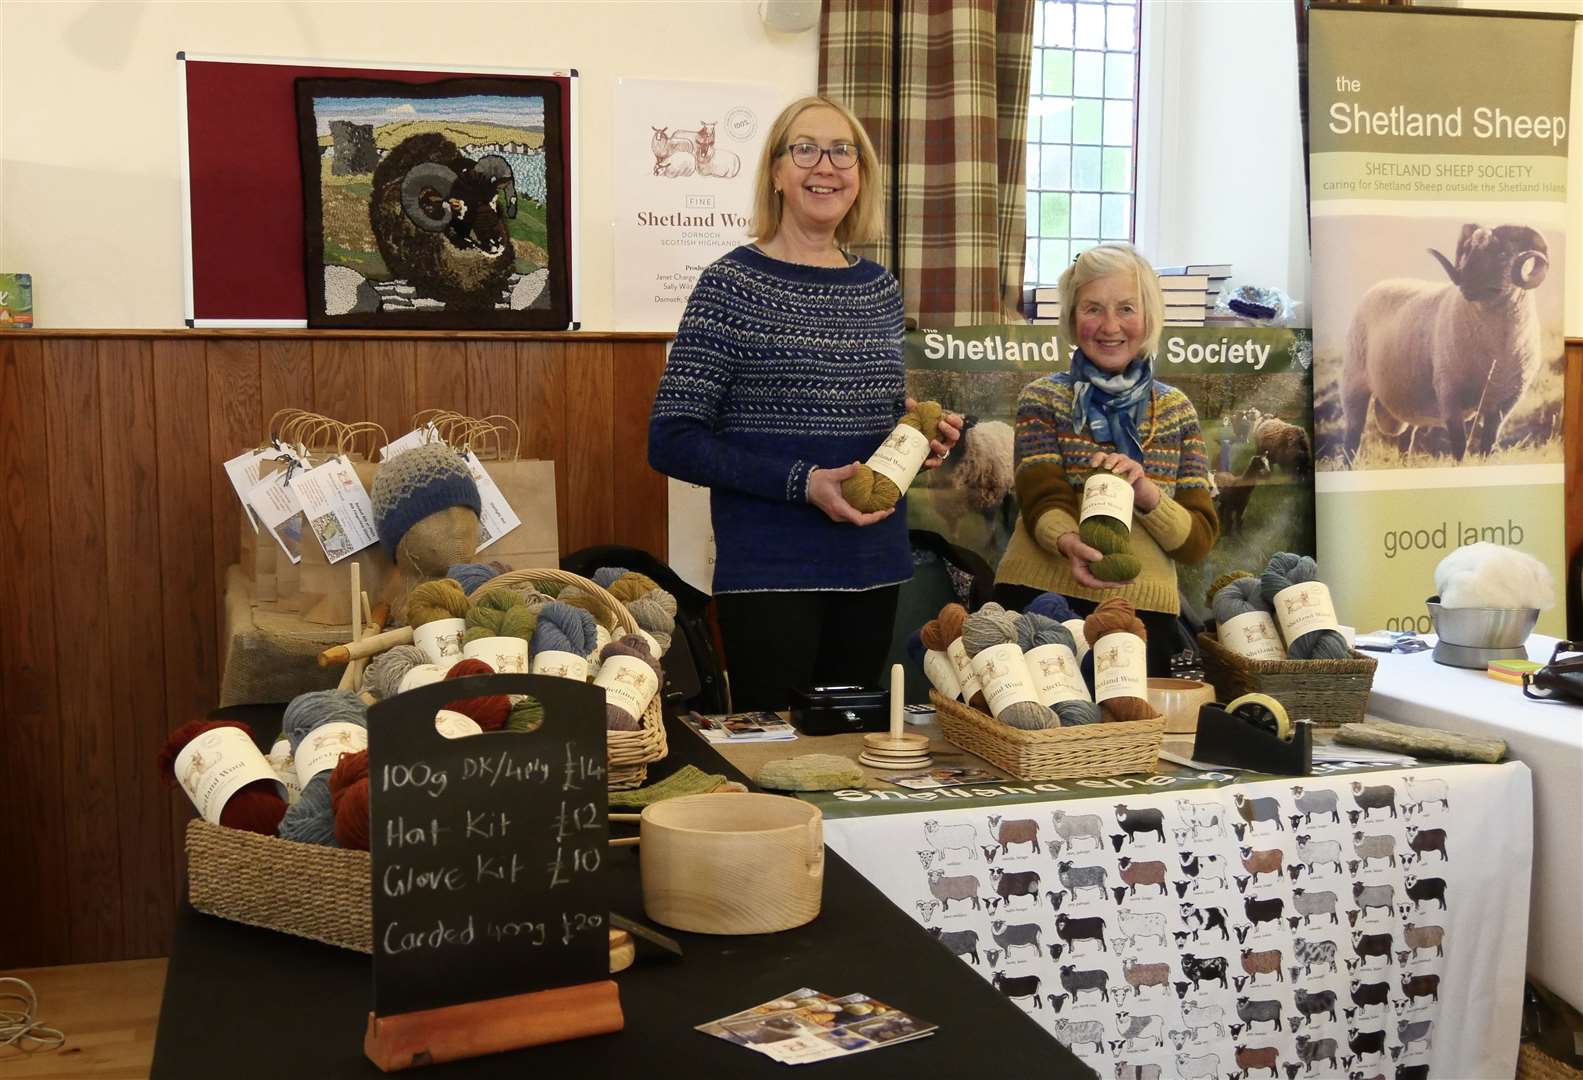 Sheep breeders Sally Wild and Janet Charge at their Dornoch Fine Shetland Wool stand.